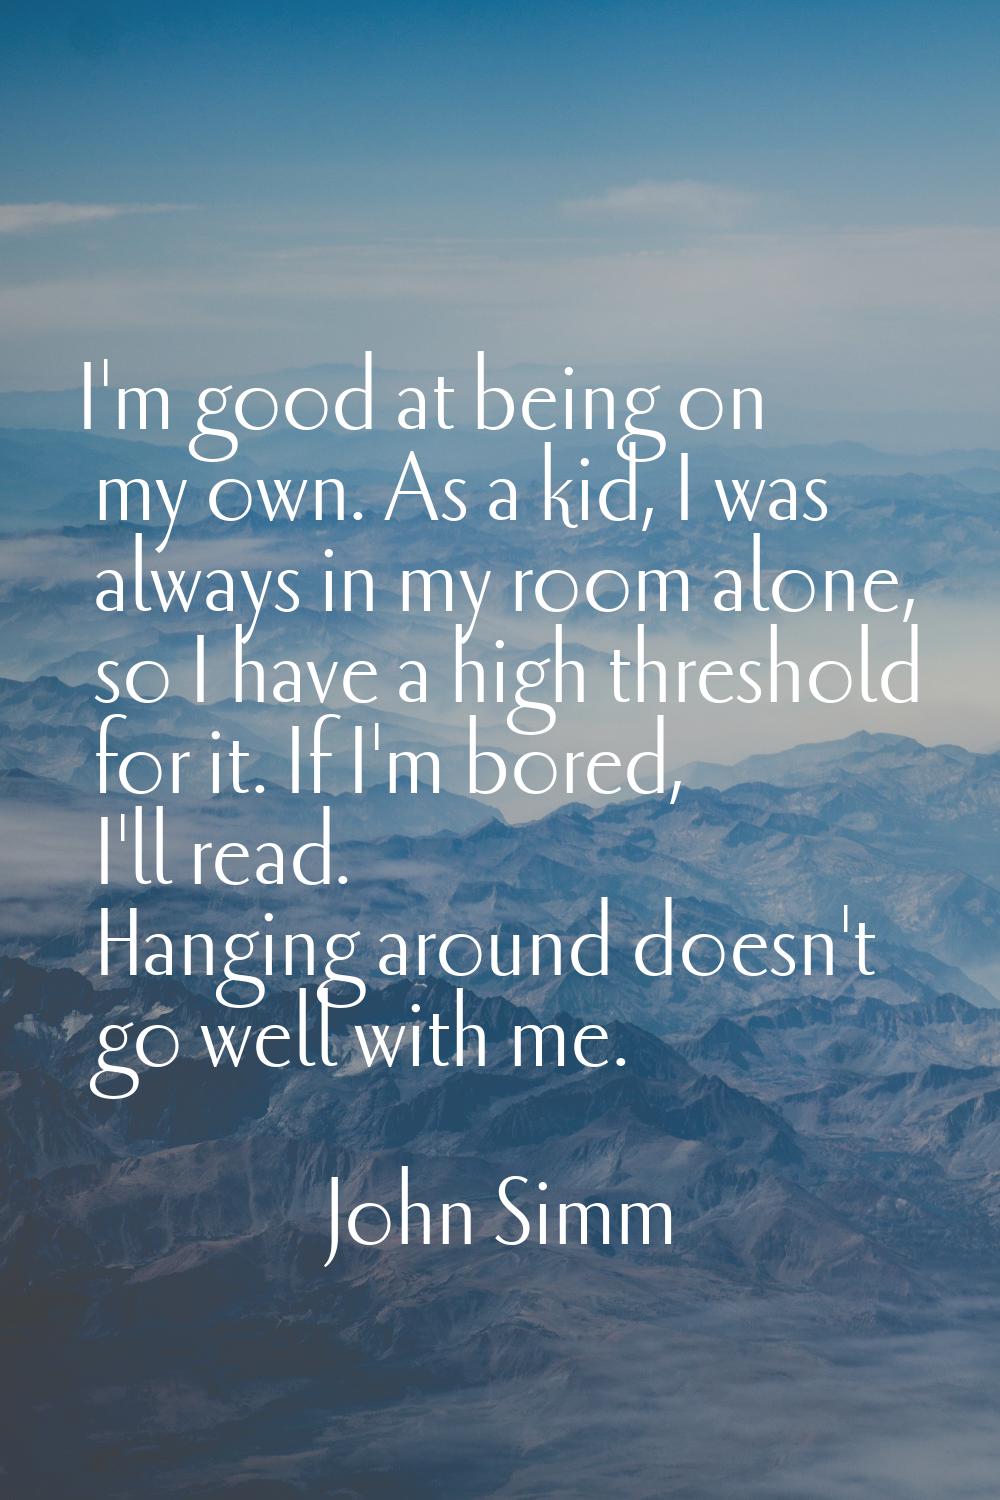 I'm good at being on my own. As a kid, I was always in my room alone, so I have a high threshold fo